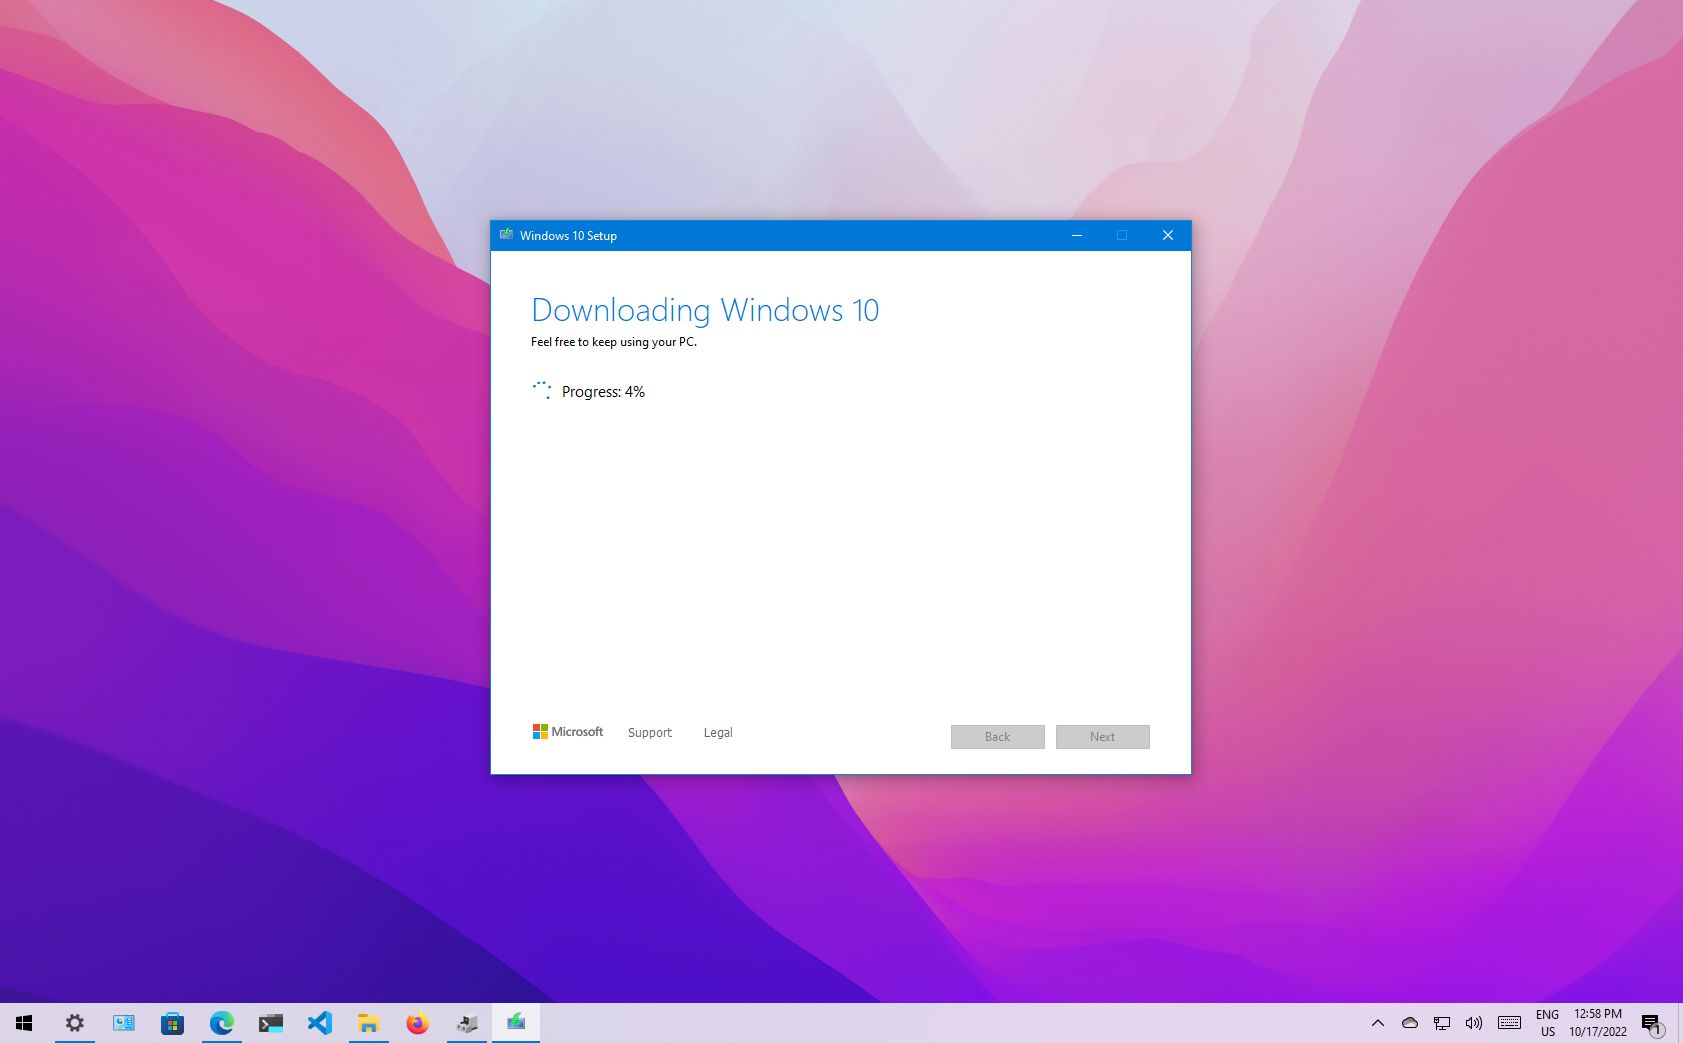 Check for Driver Updates
Perform a Clean Installation of Windows